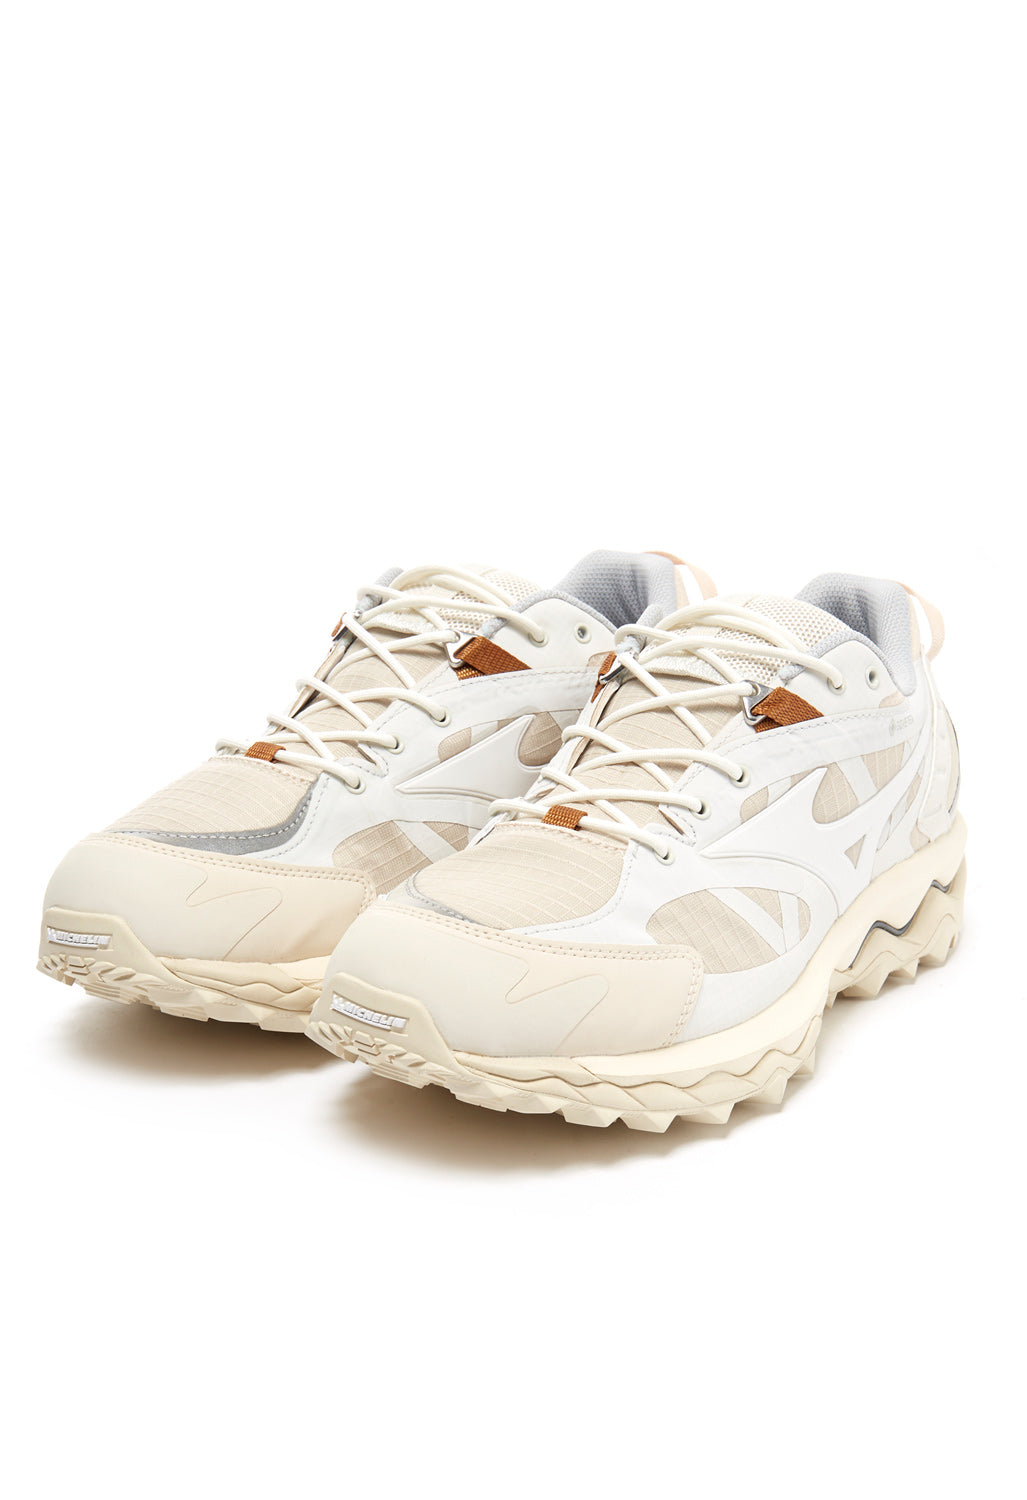 Mizuno Wave Mujin TL GTX Trainers - Summer Sand / White / Mother of Pe –  Outsiders Store UK